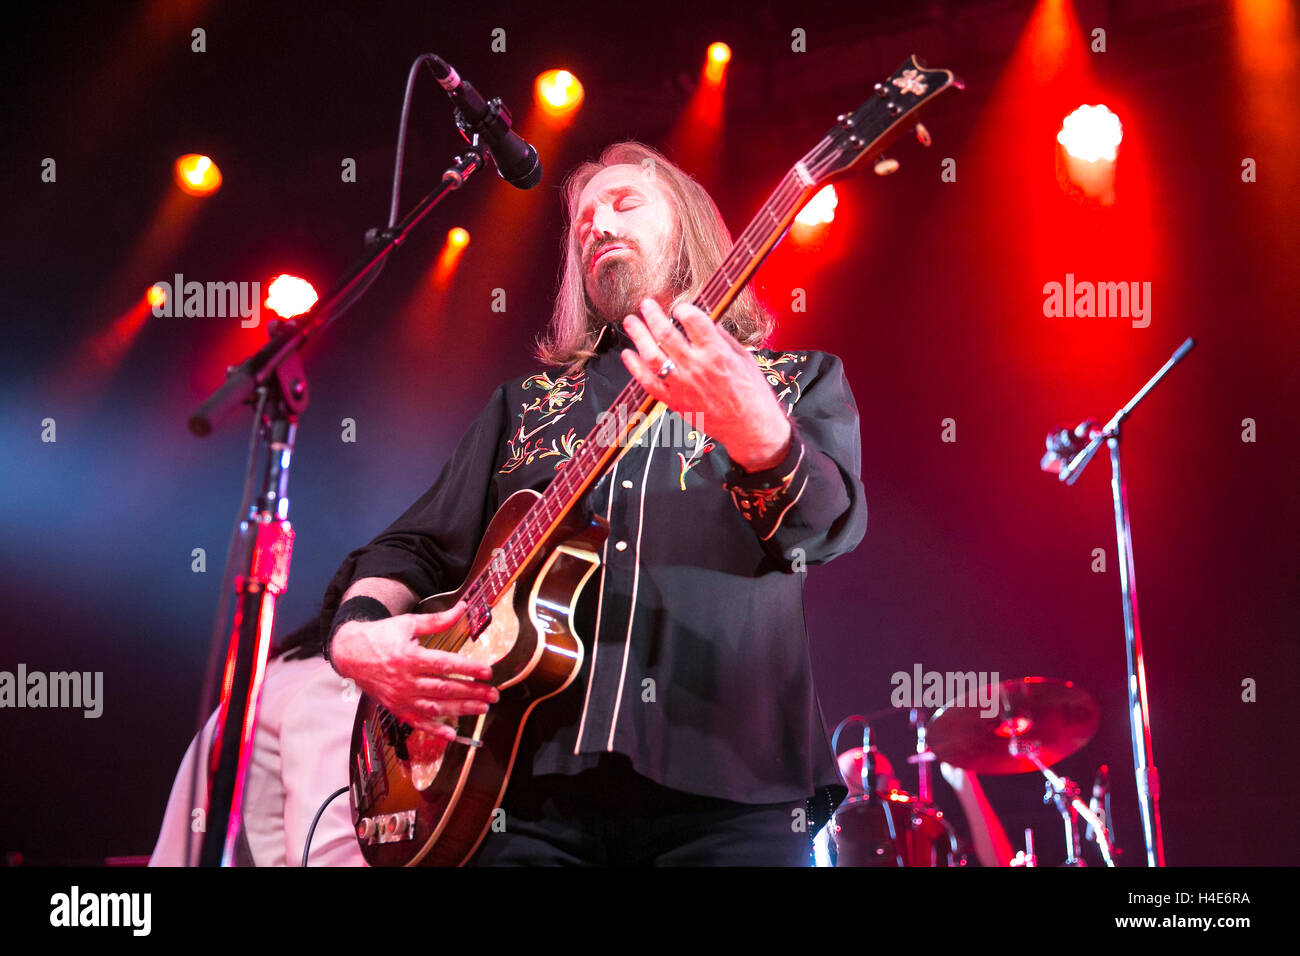 Tom Petty of Mudcrutch perfoms at The Fillmore on June 19, 2016 in San Francisco, California. Stock Photo